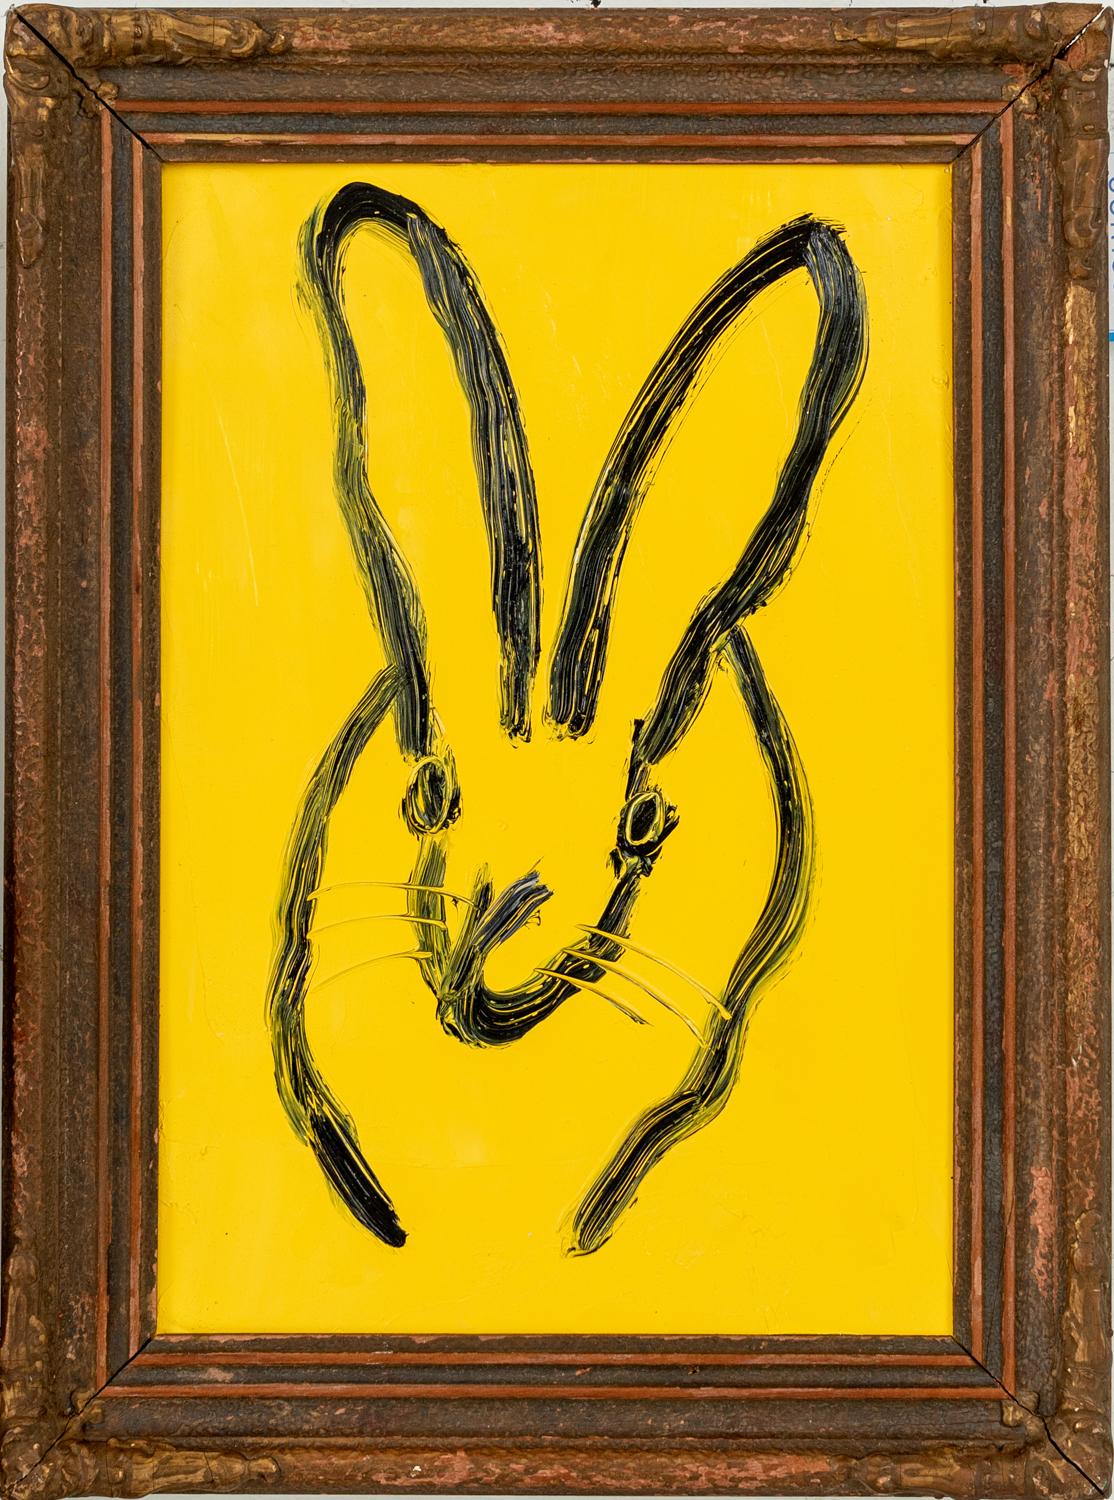 Hunt Slonem Figurative Painting - Roland Yellow "Bunny Painting" Original Oil Painting in Vintage Frame